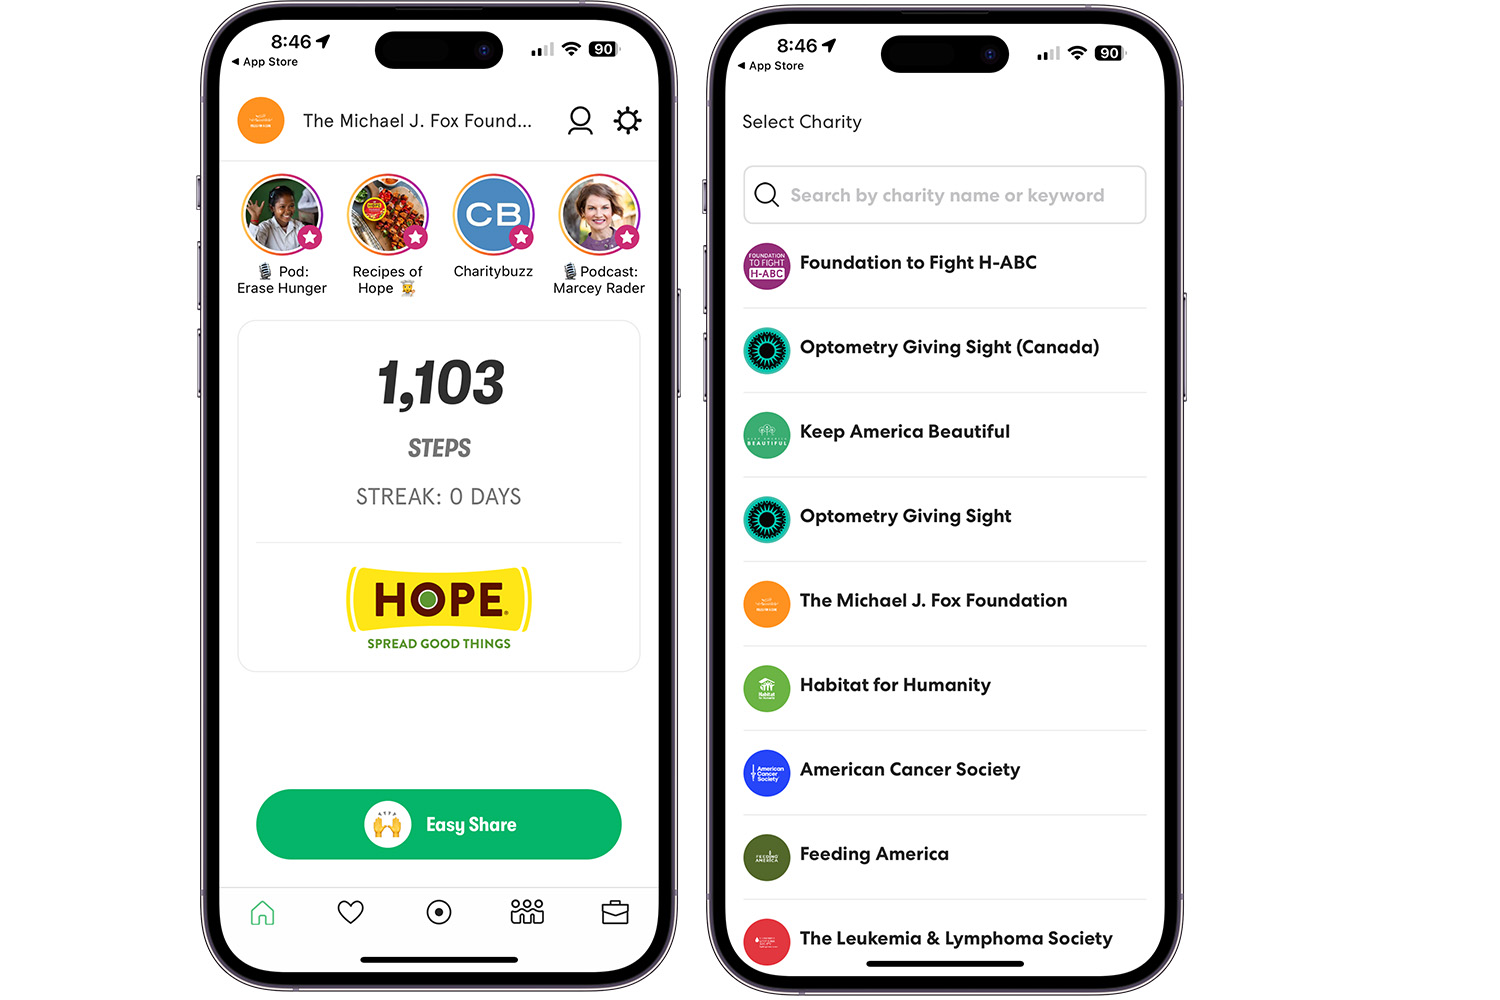 Charity Giving app for iPhone.